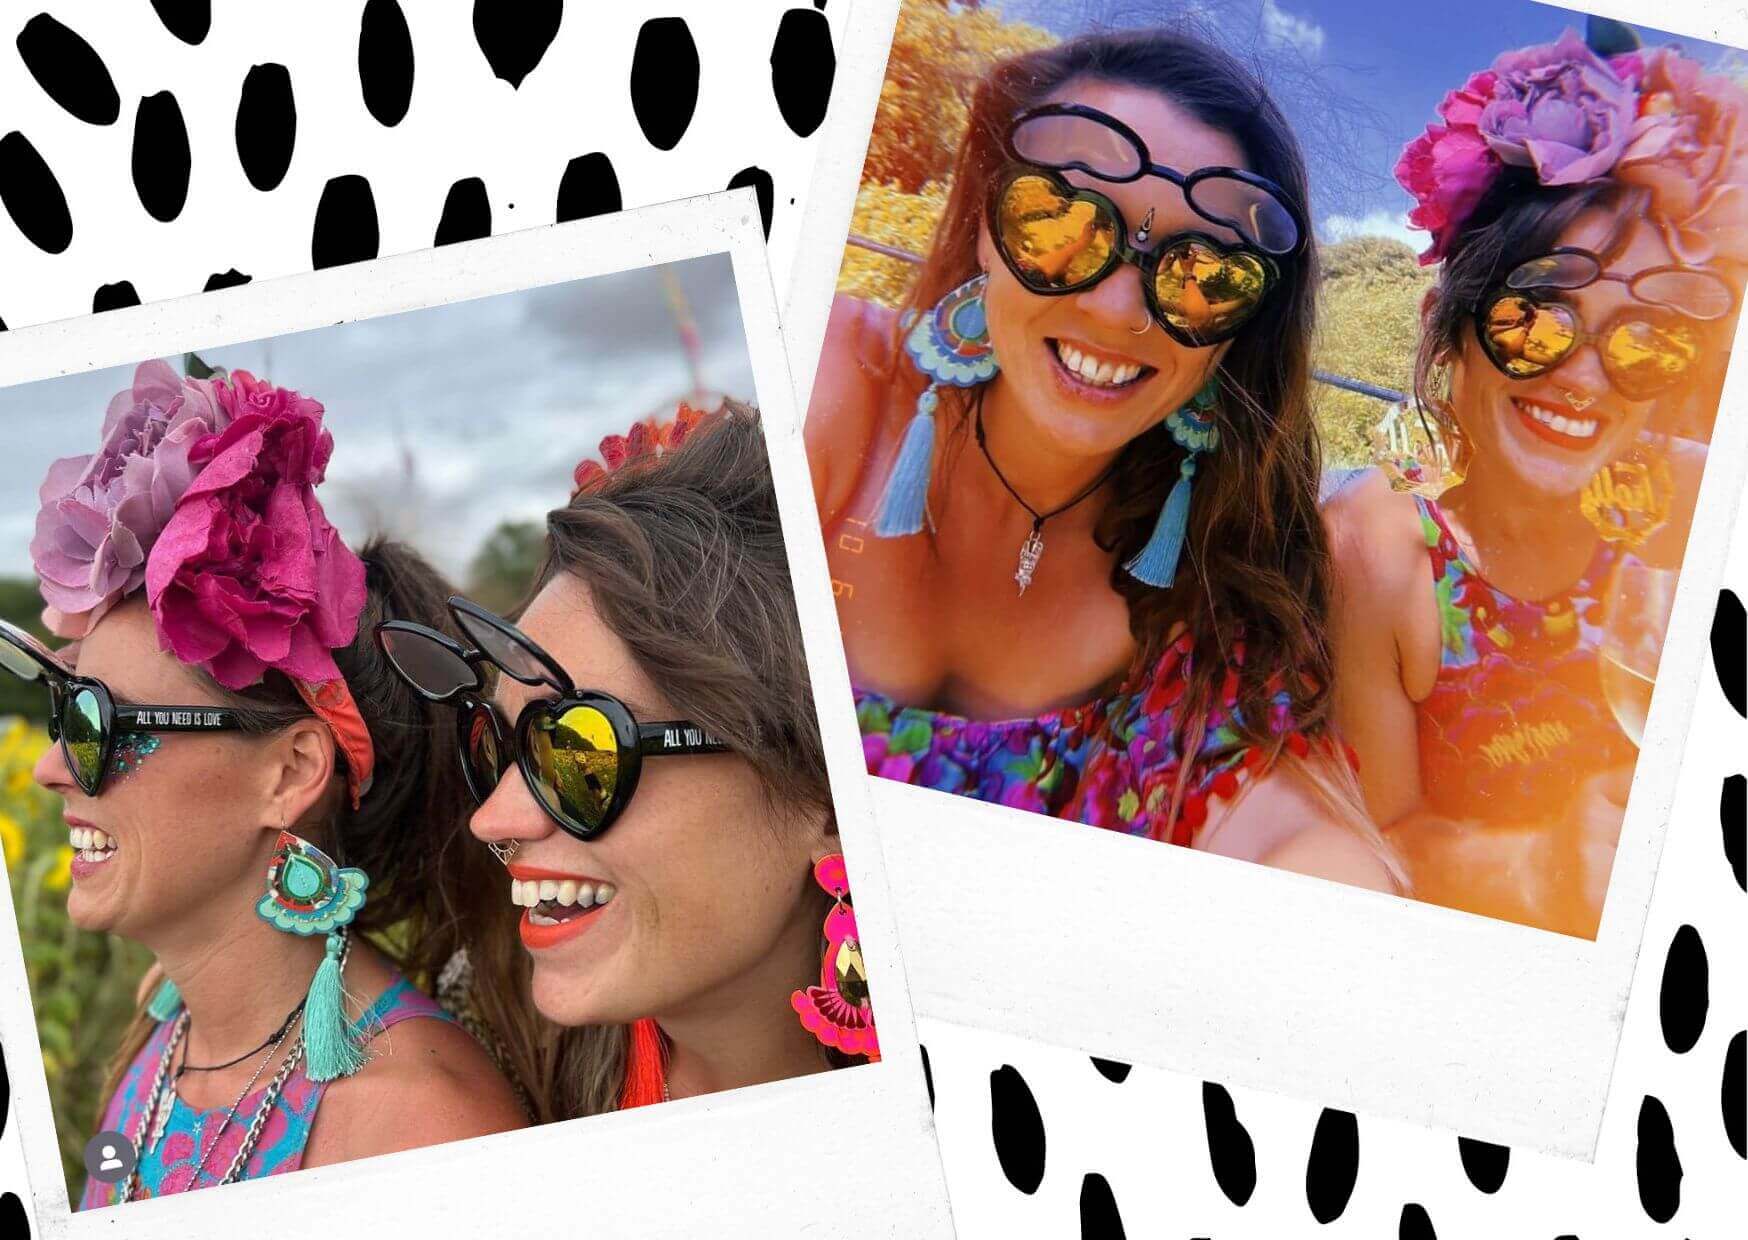 Two polaroid photos sit on a black and white patterned background. Both photos feature two smiling women wearing floral headdresses, heart shaped sunglasses and colourful statement tassel earrings